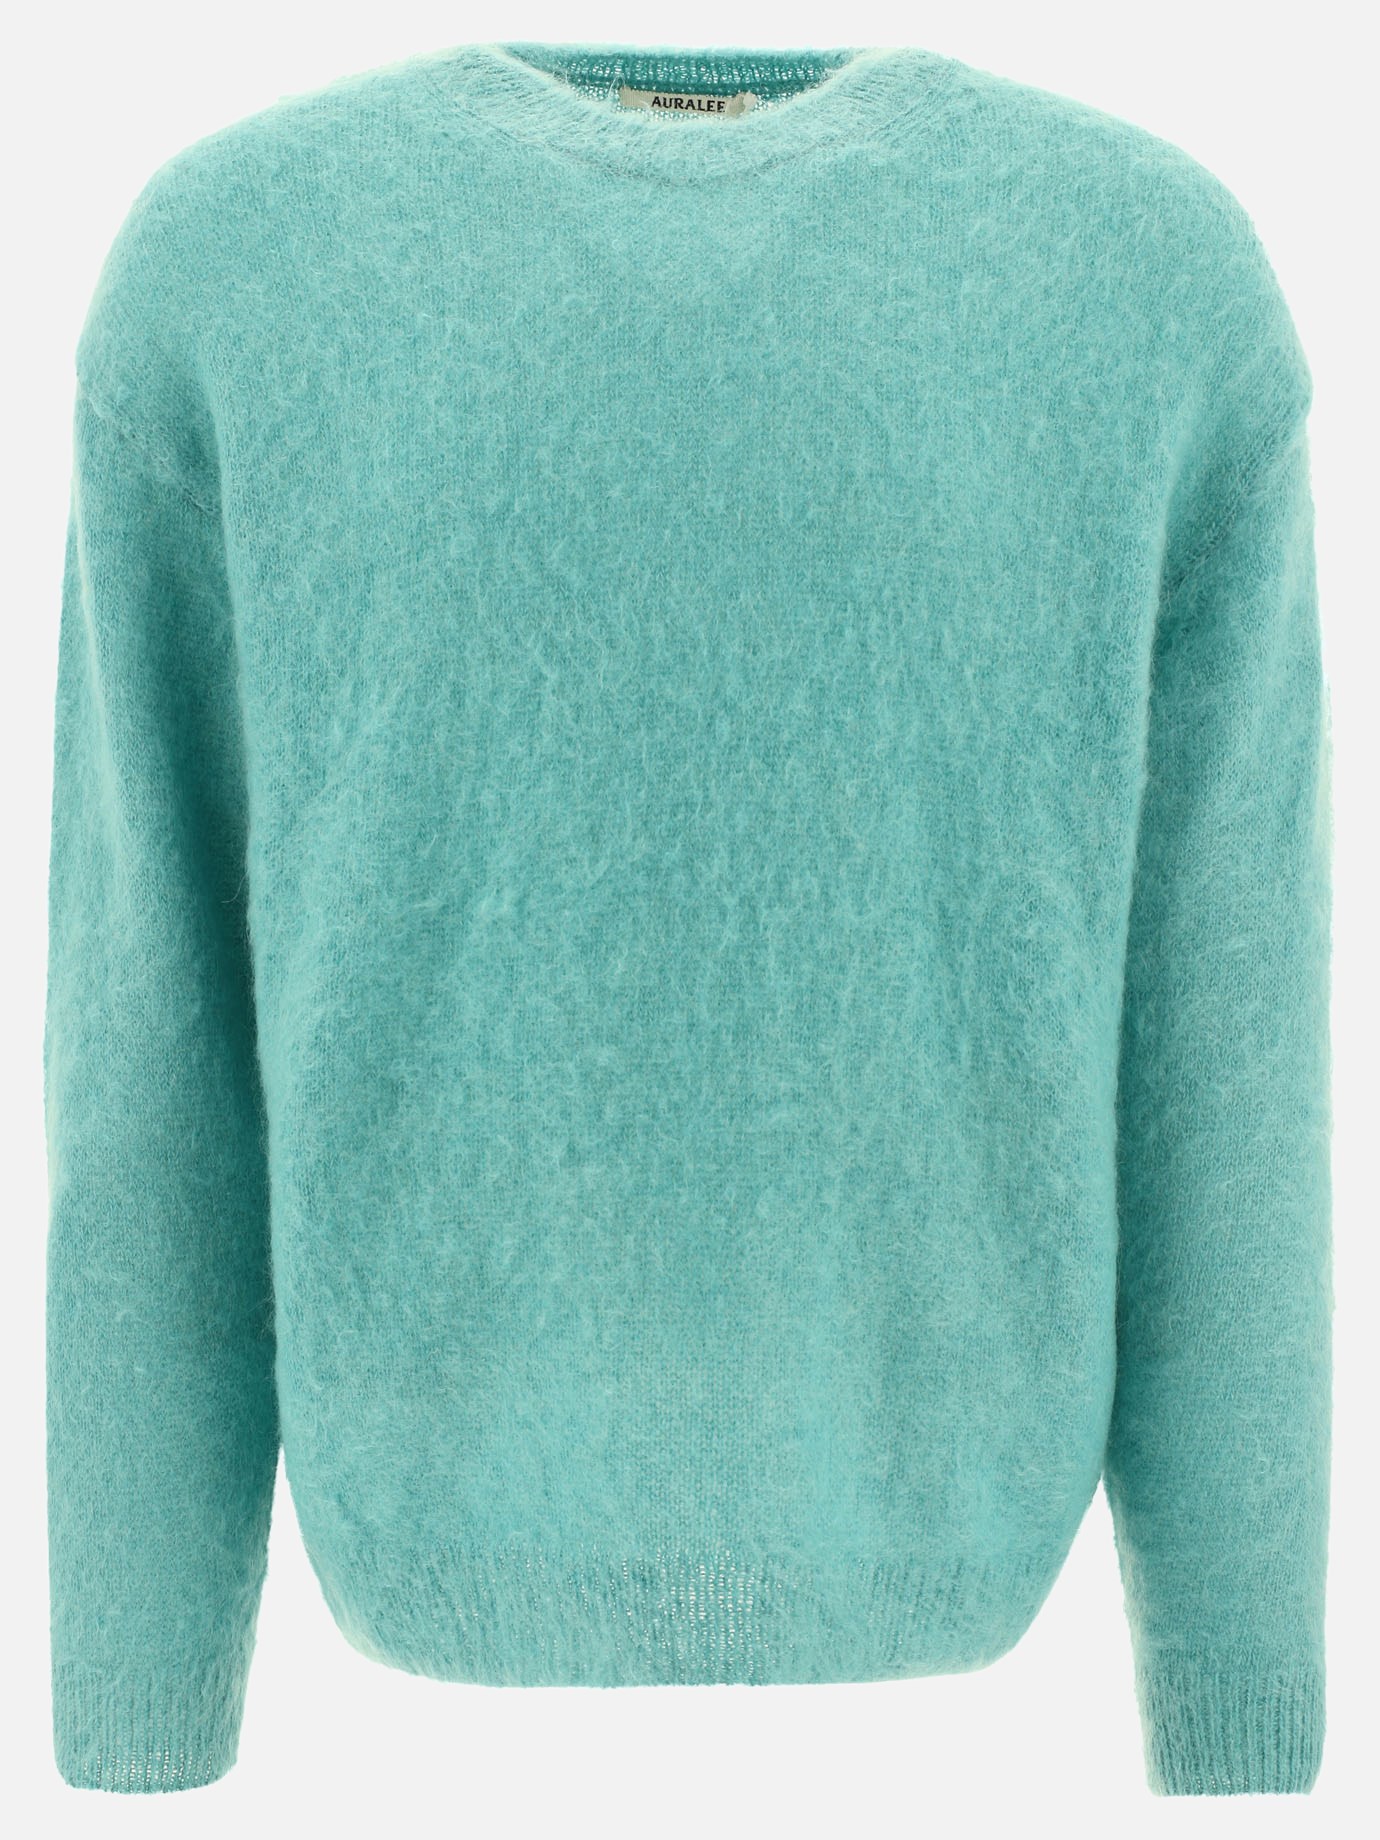 Maglione in mohair spazzolatoby Auralee - 4